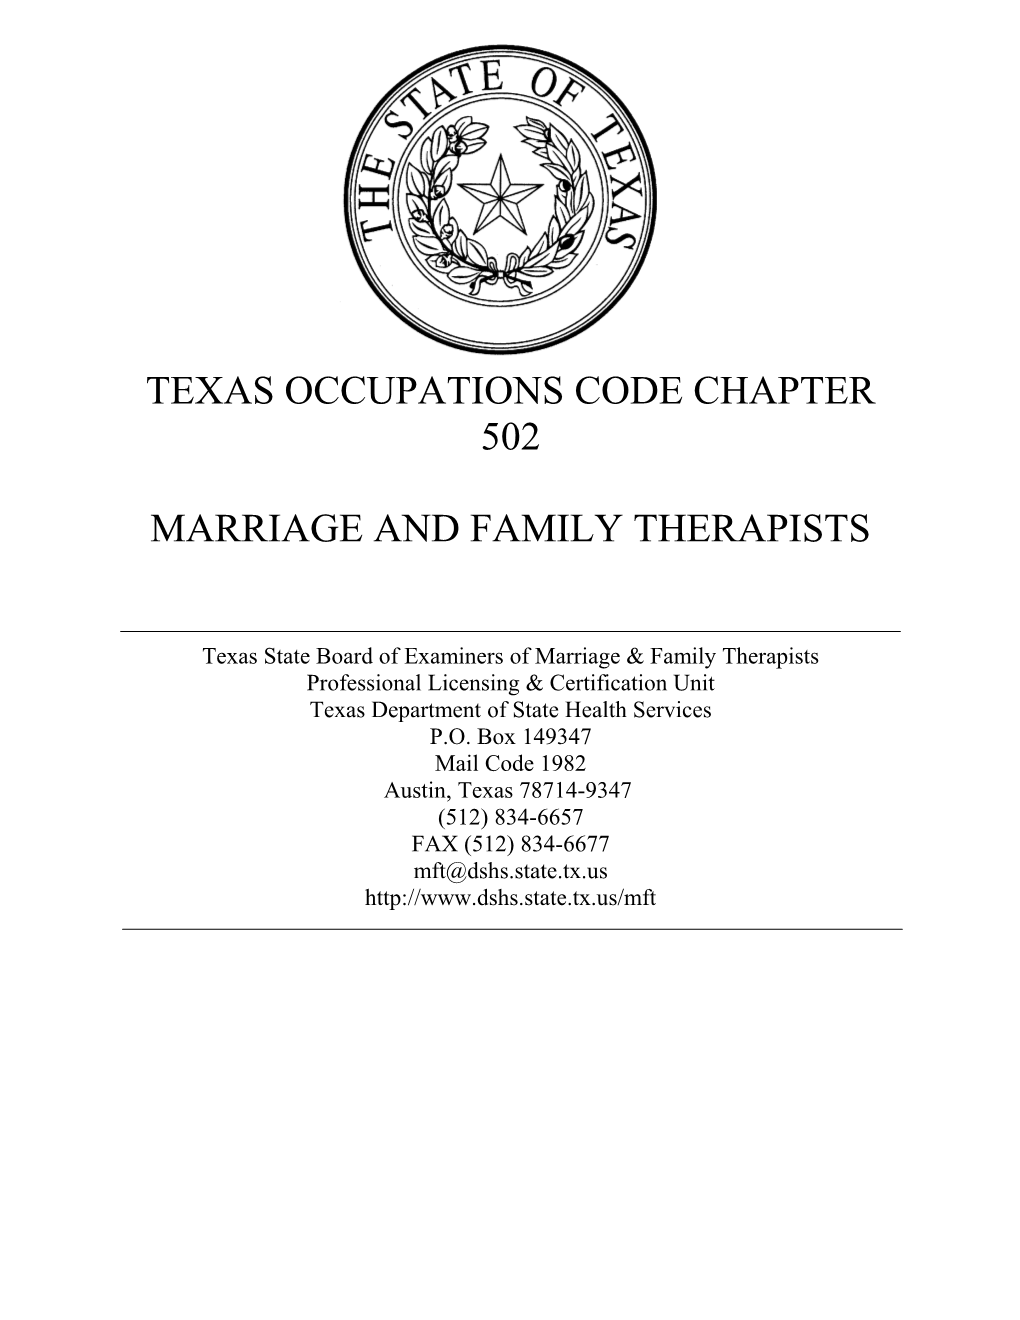 Texas Occupations Code Chapter 502